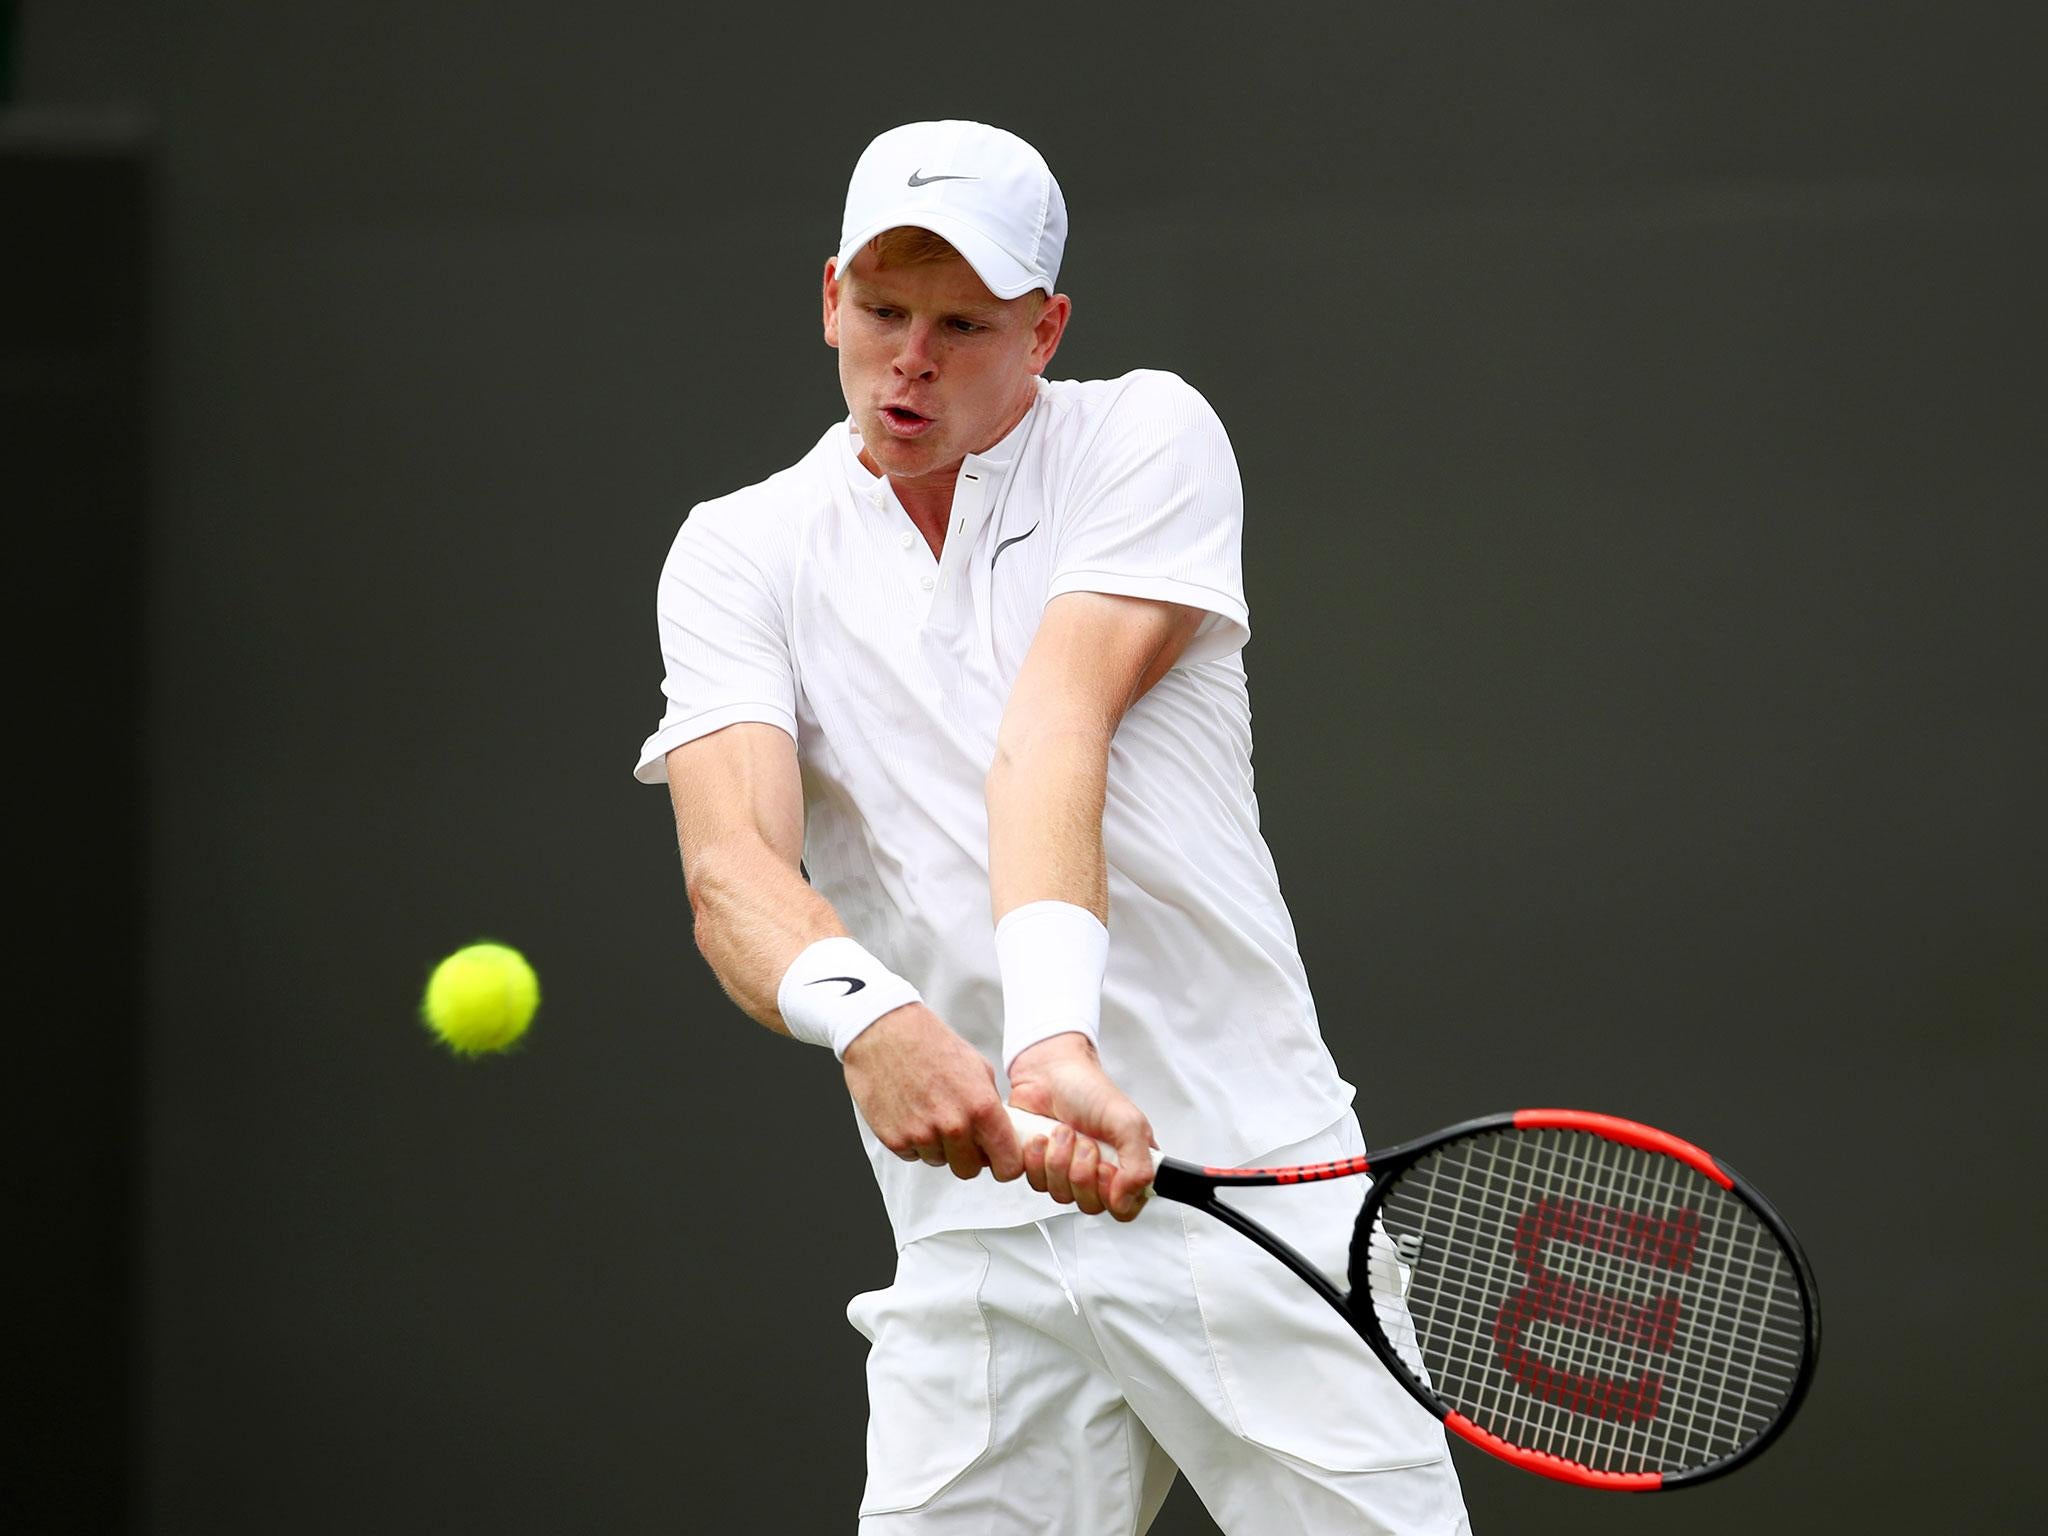 Edmund beat fellow Brit Alex Ward to reach the second round for the firs time